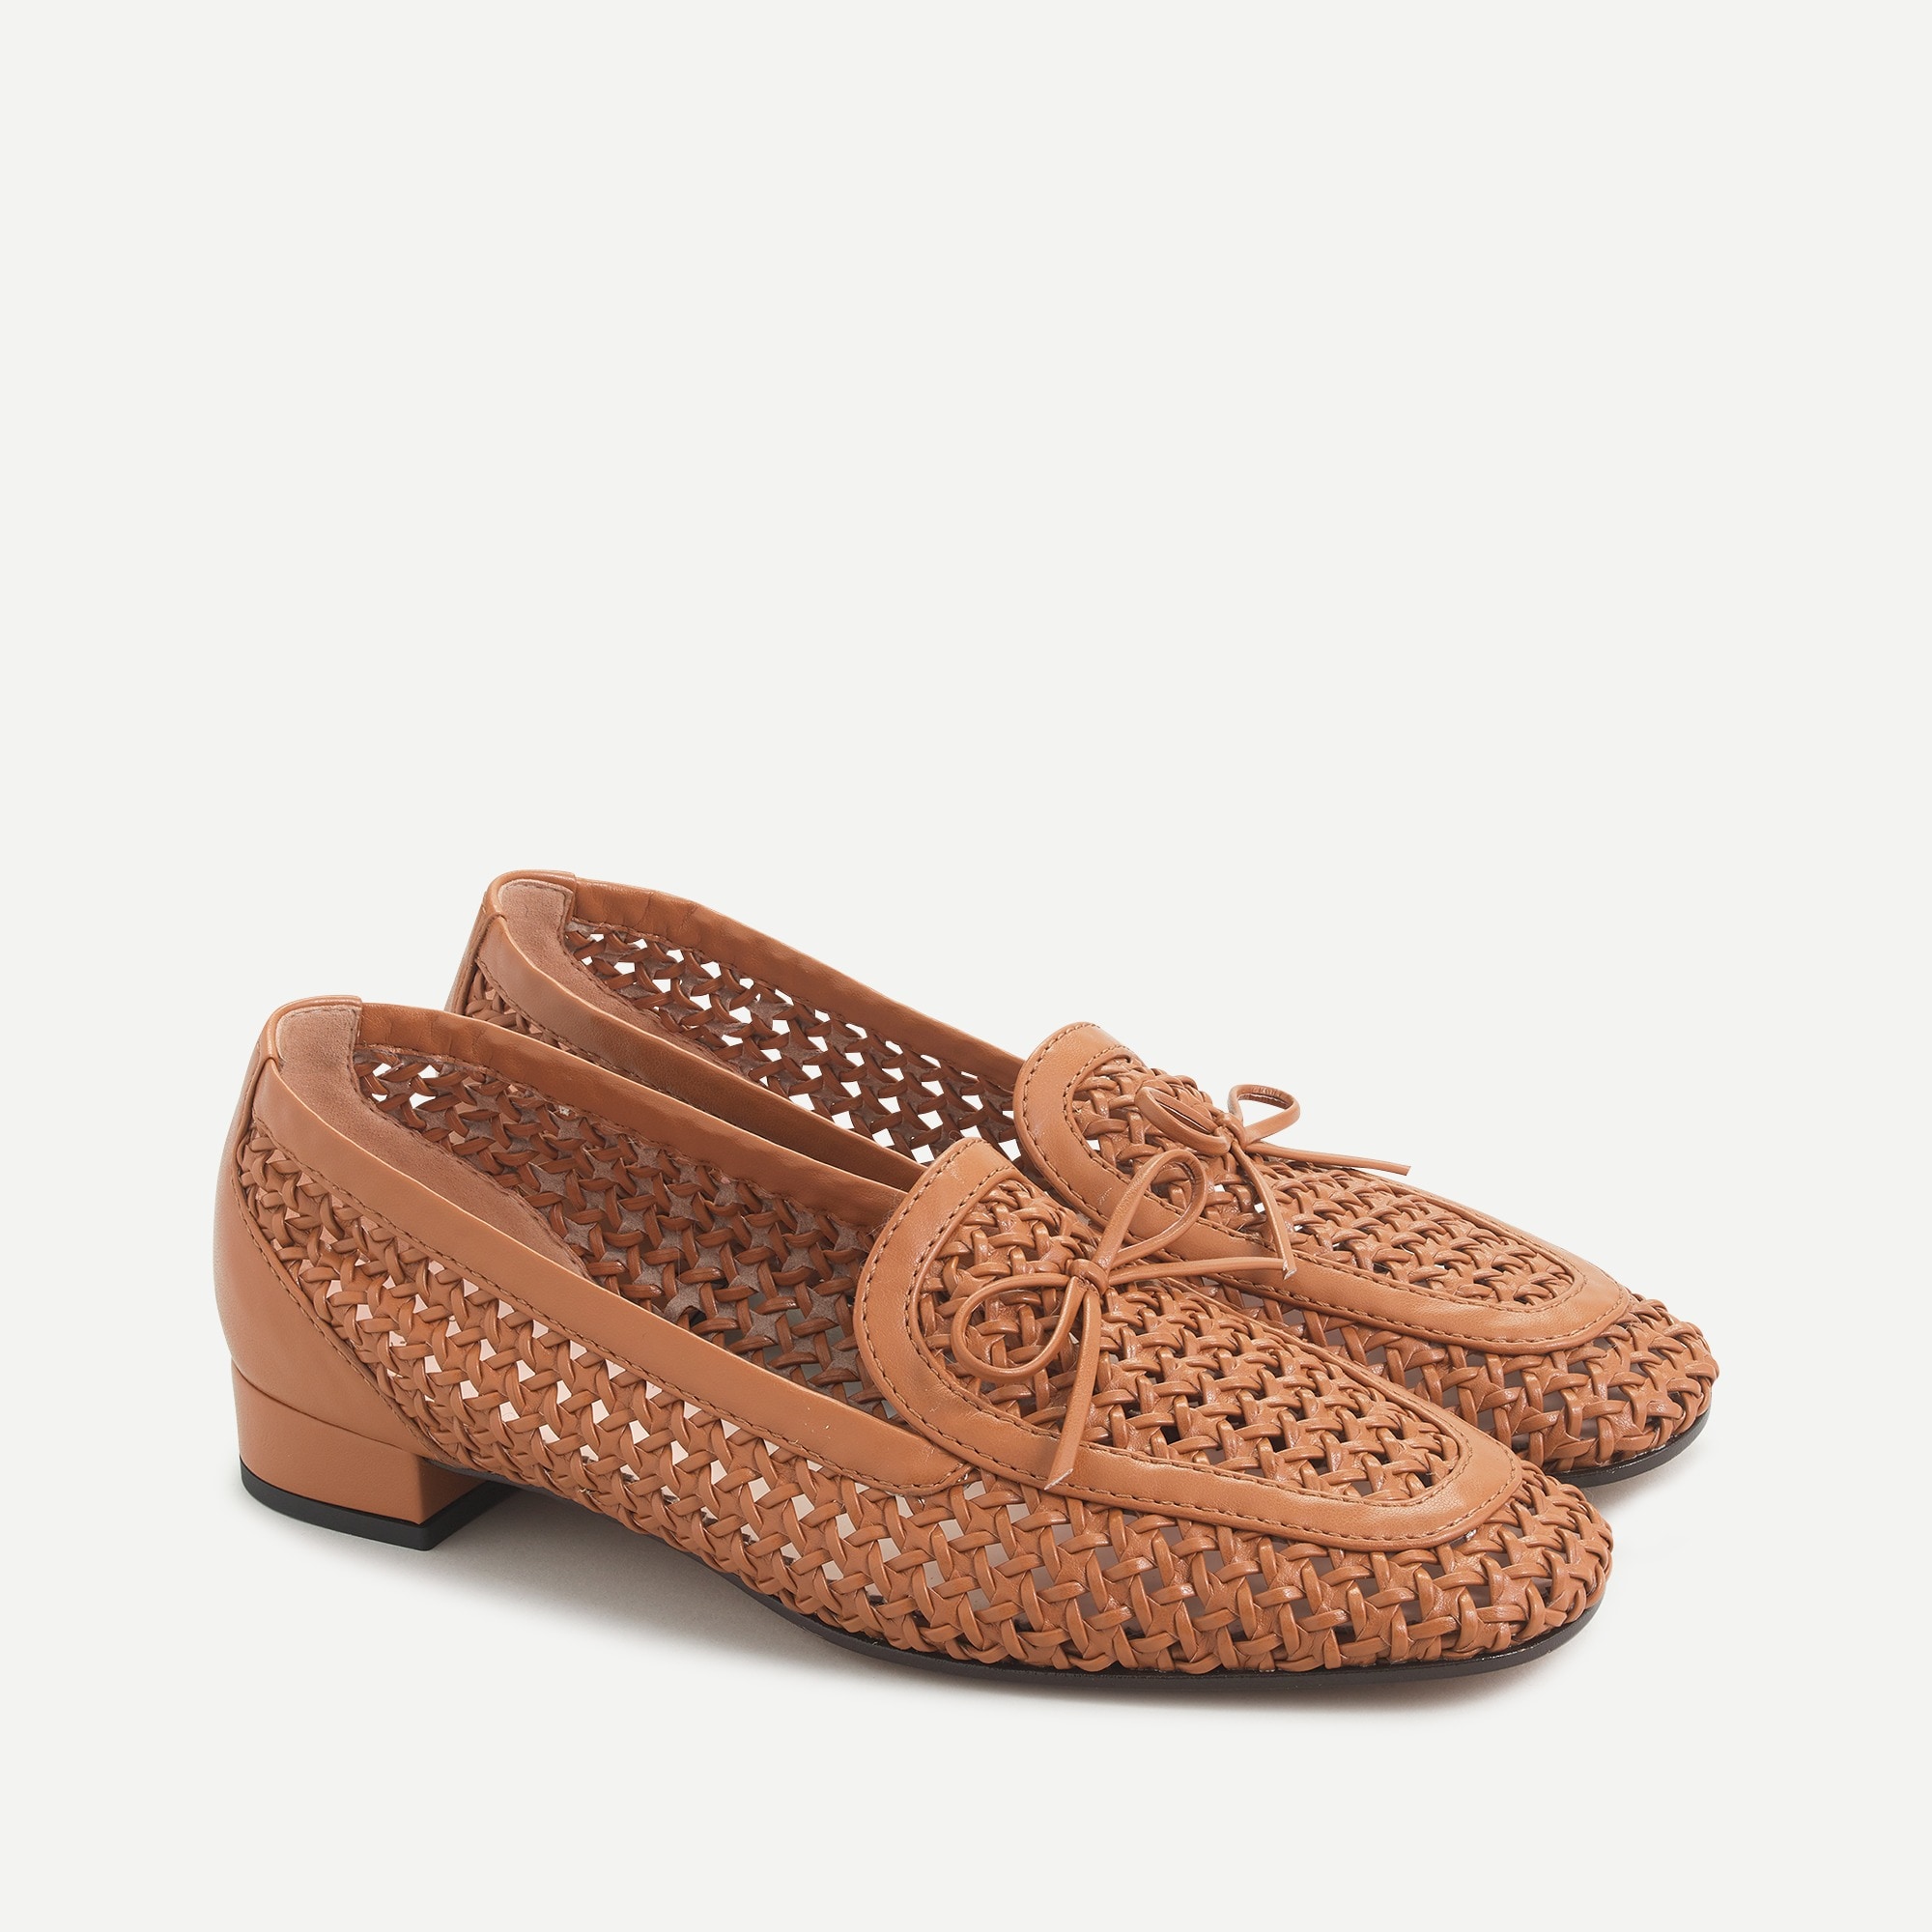 J.Crew: Woven Loafers With Bow Detail For Women